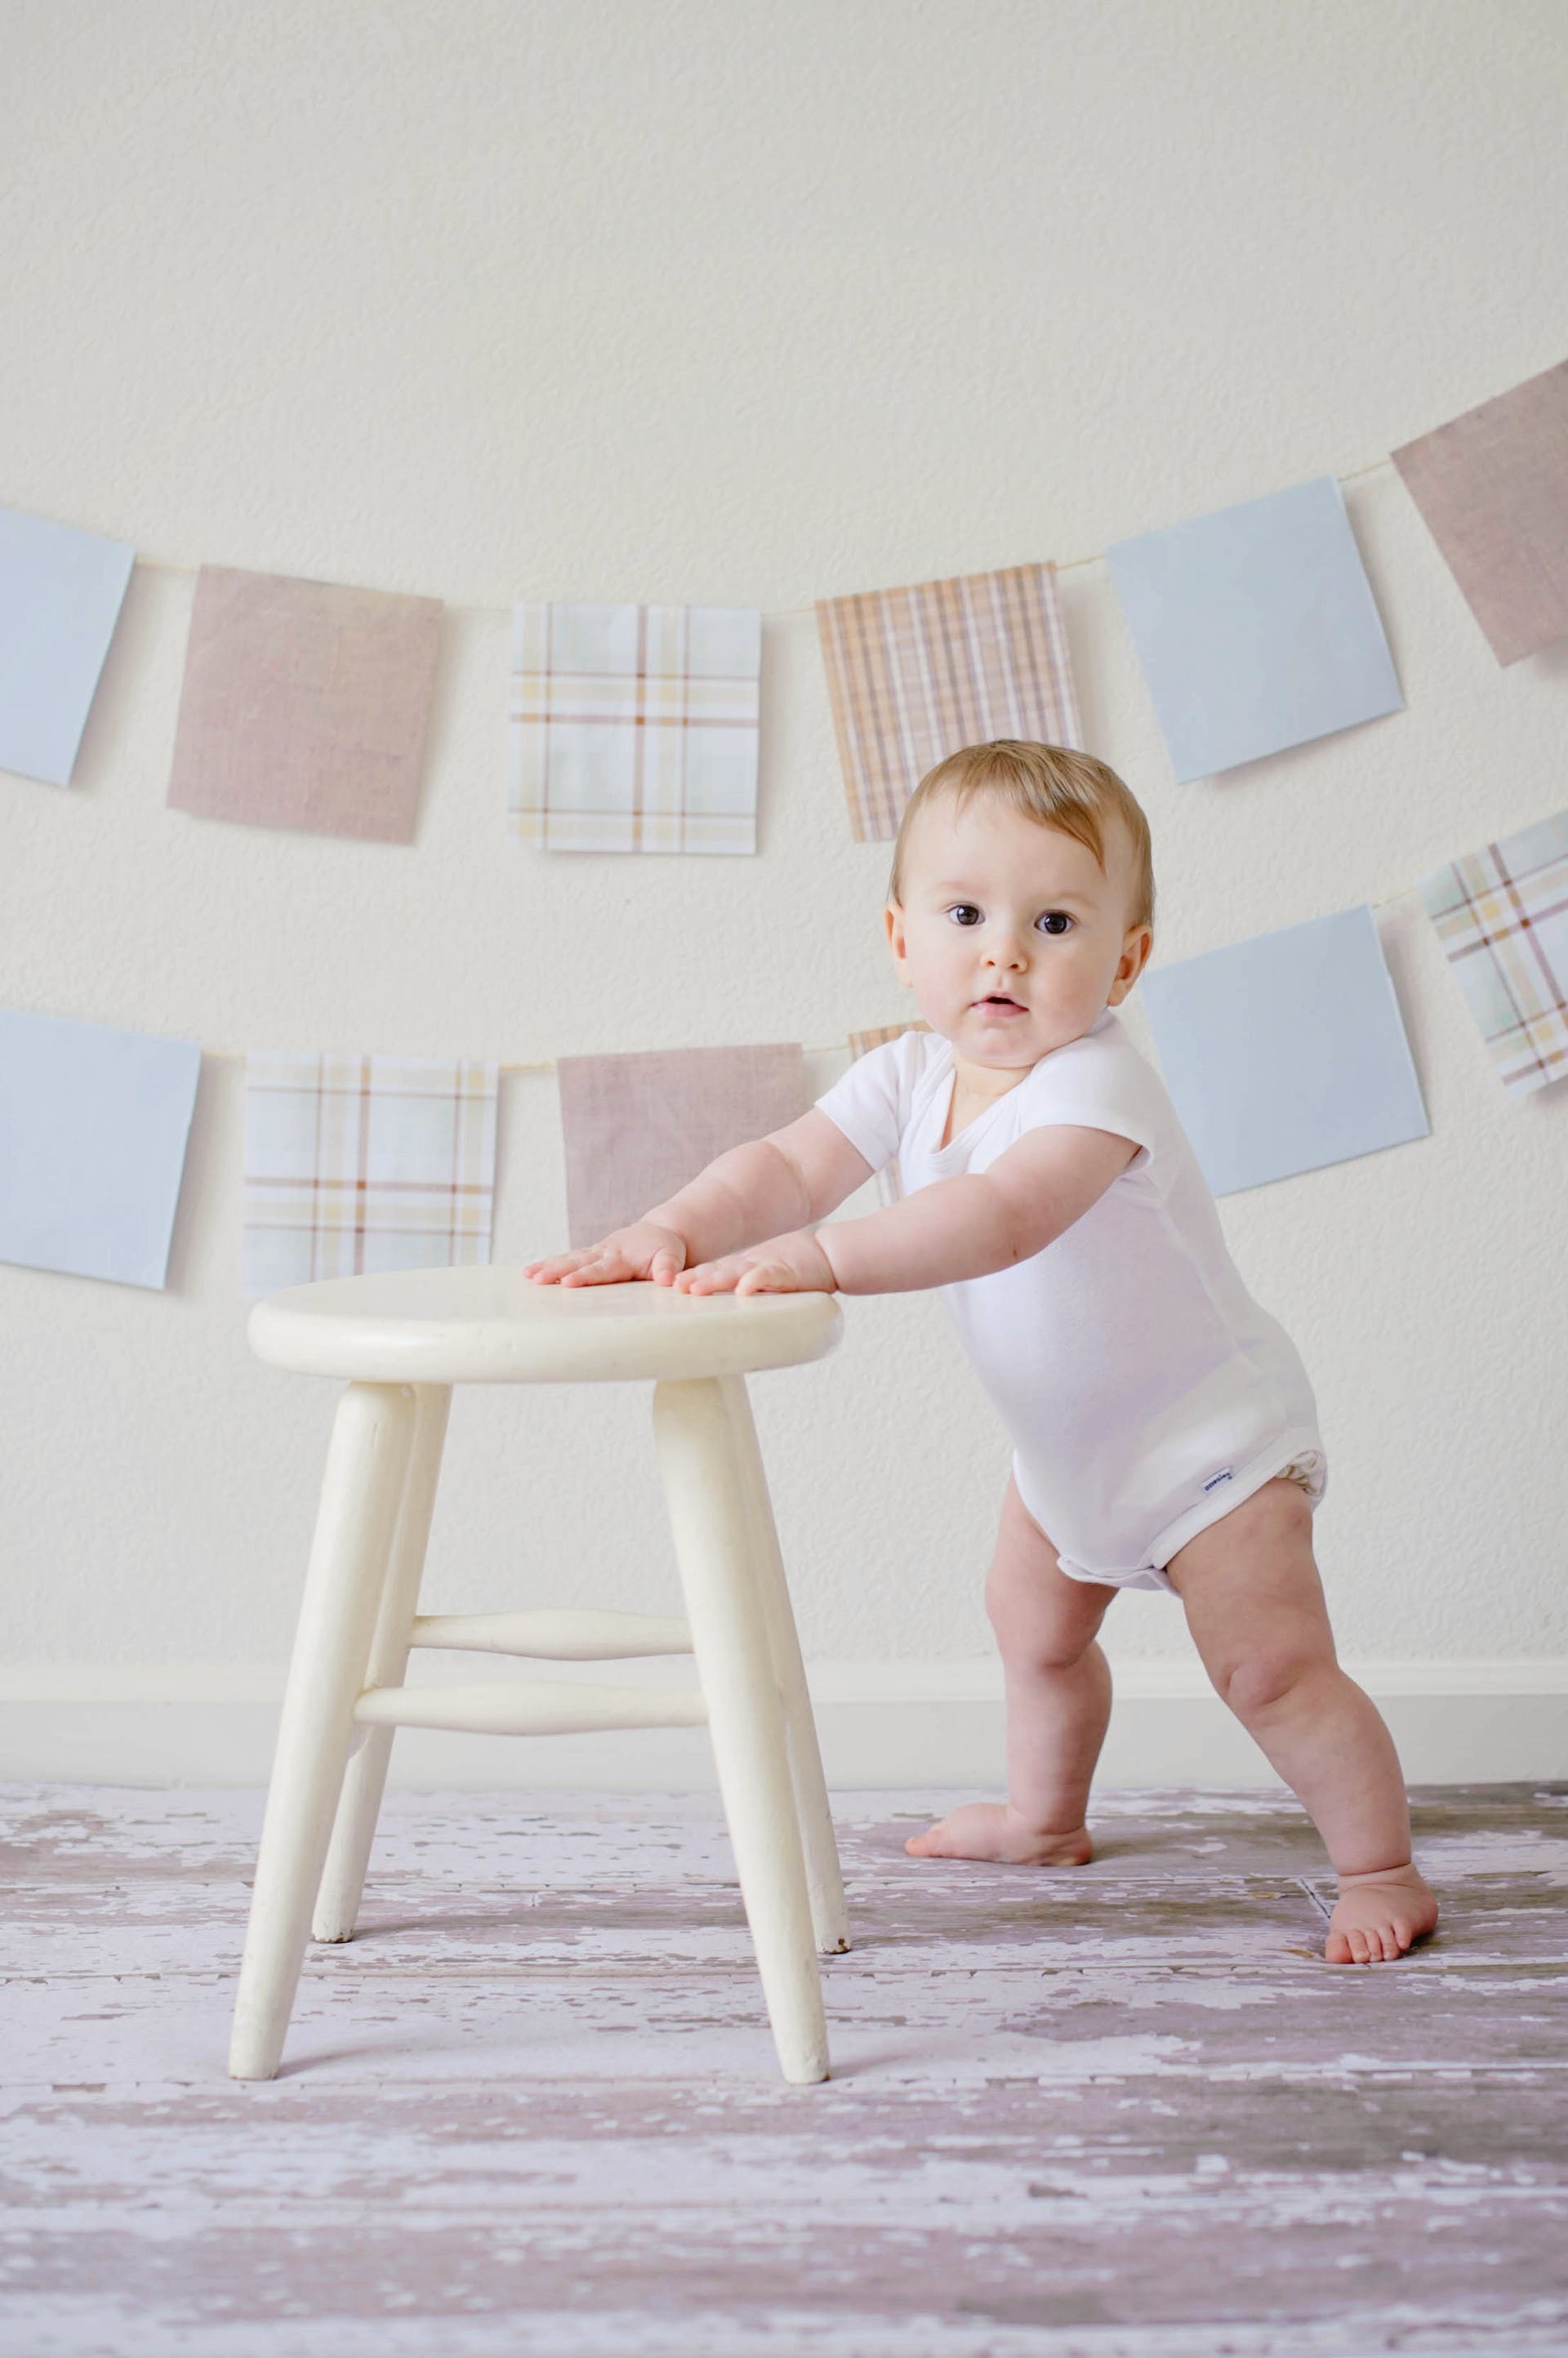 A baby holding a stool | Source: Pexels